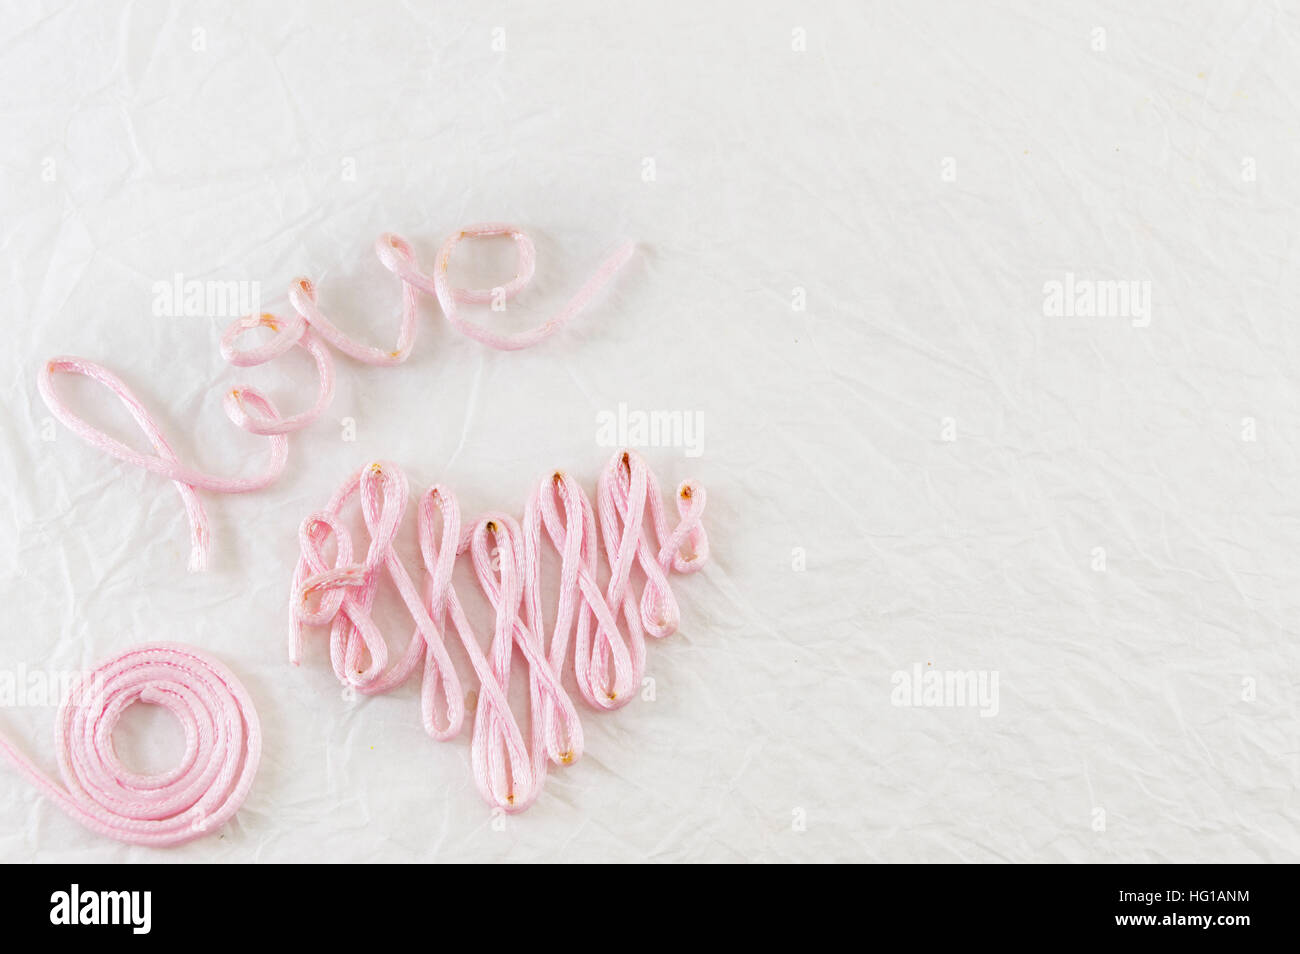 Word love made out of pink sewing thread Stock Photo